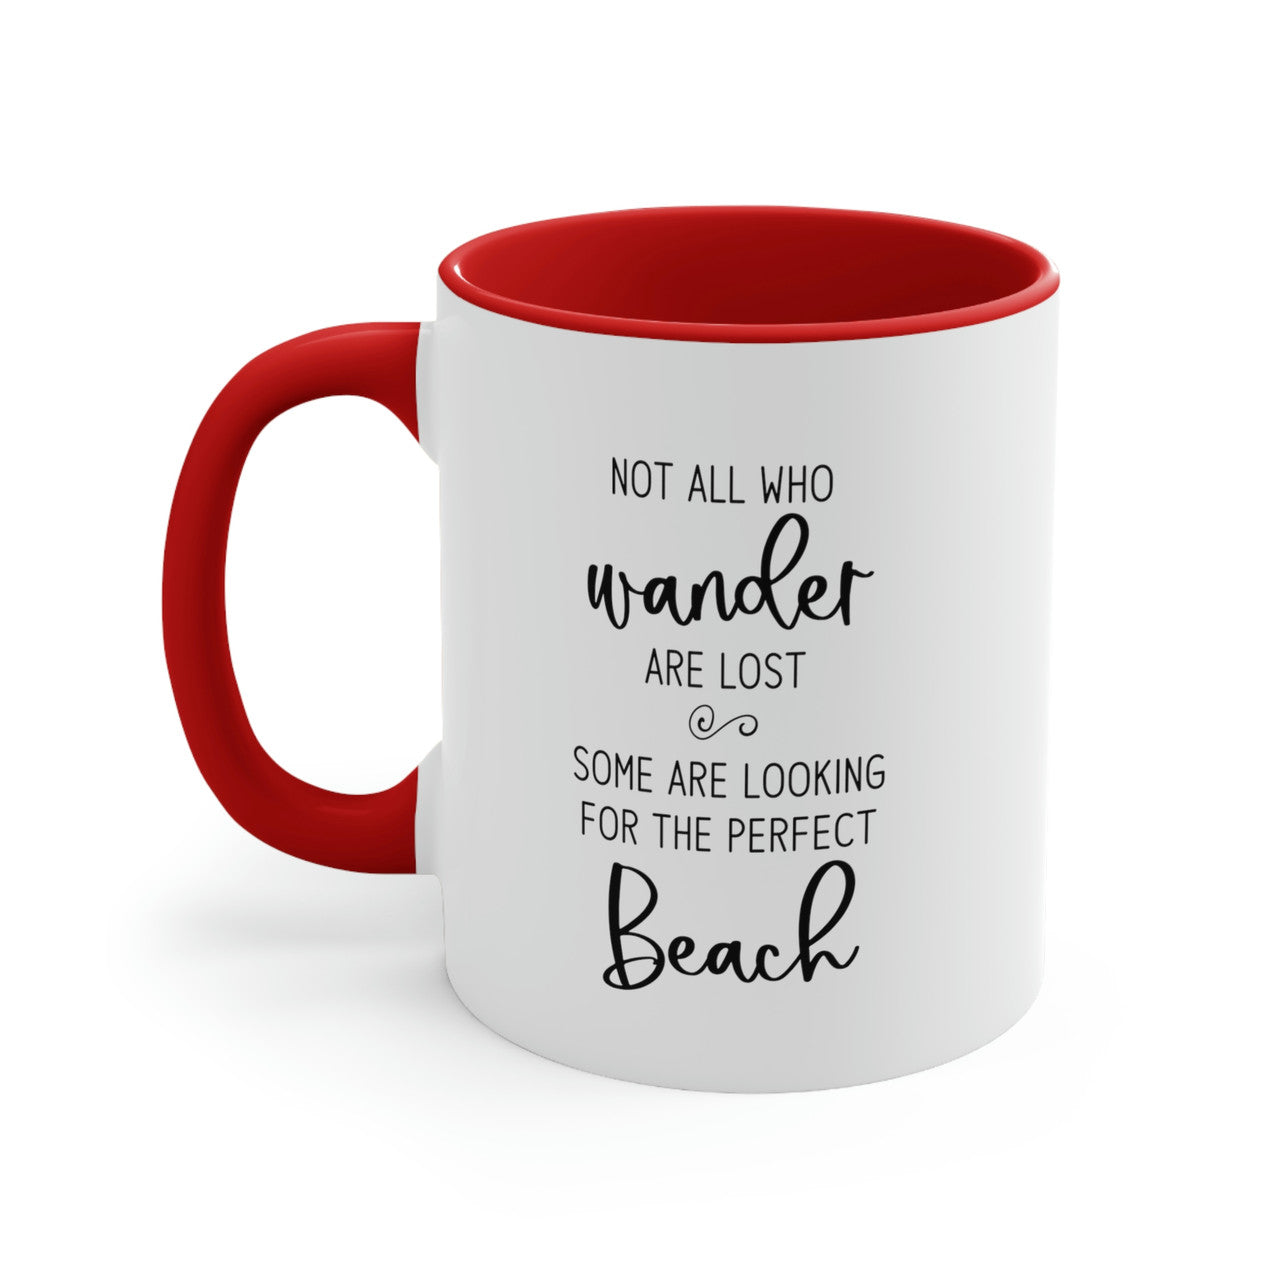 Not All Who Wander Are Lost Ceramic Beach Coffee Mug, 5 Colors Mugs New England Trading Co Red  